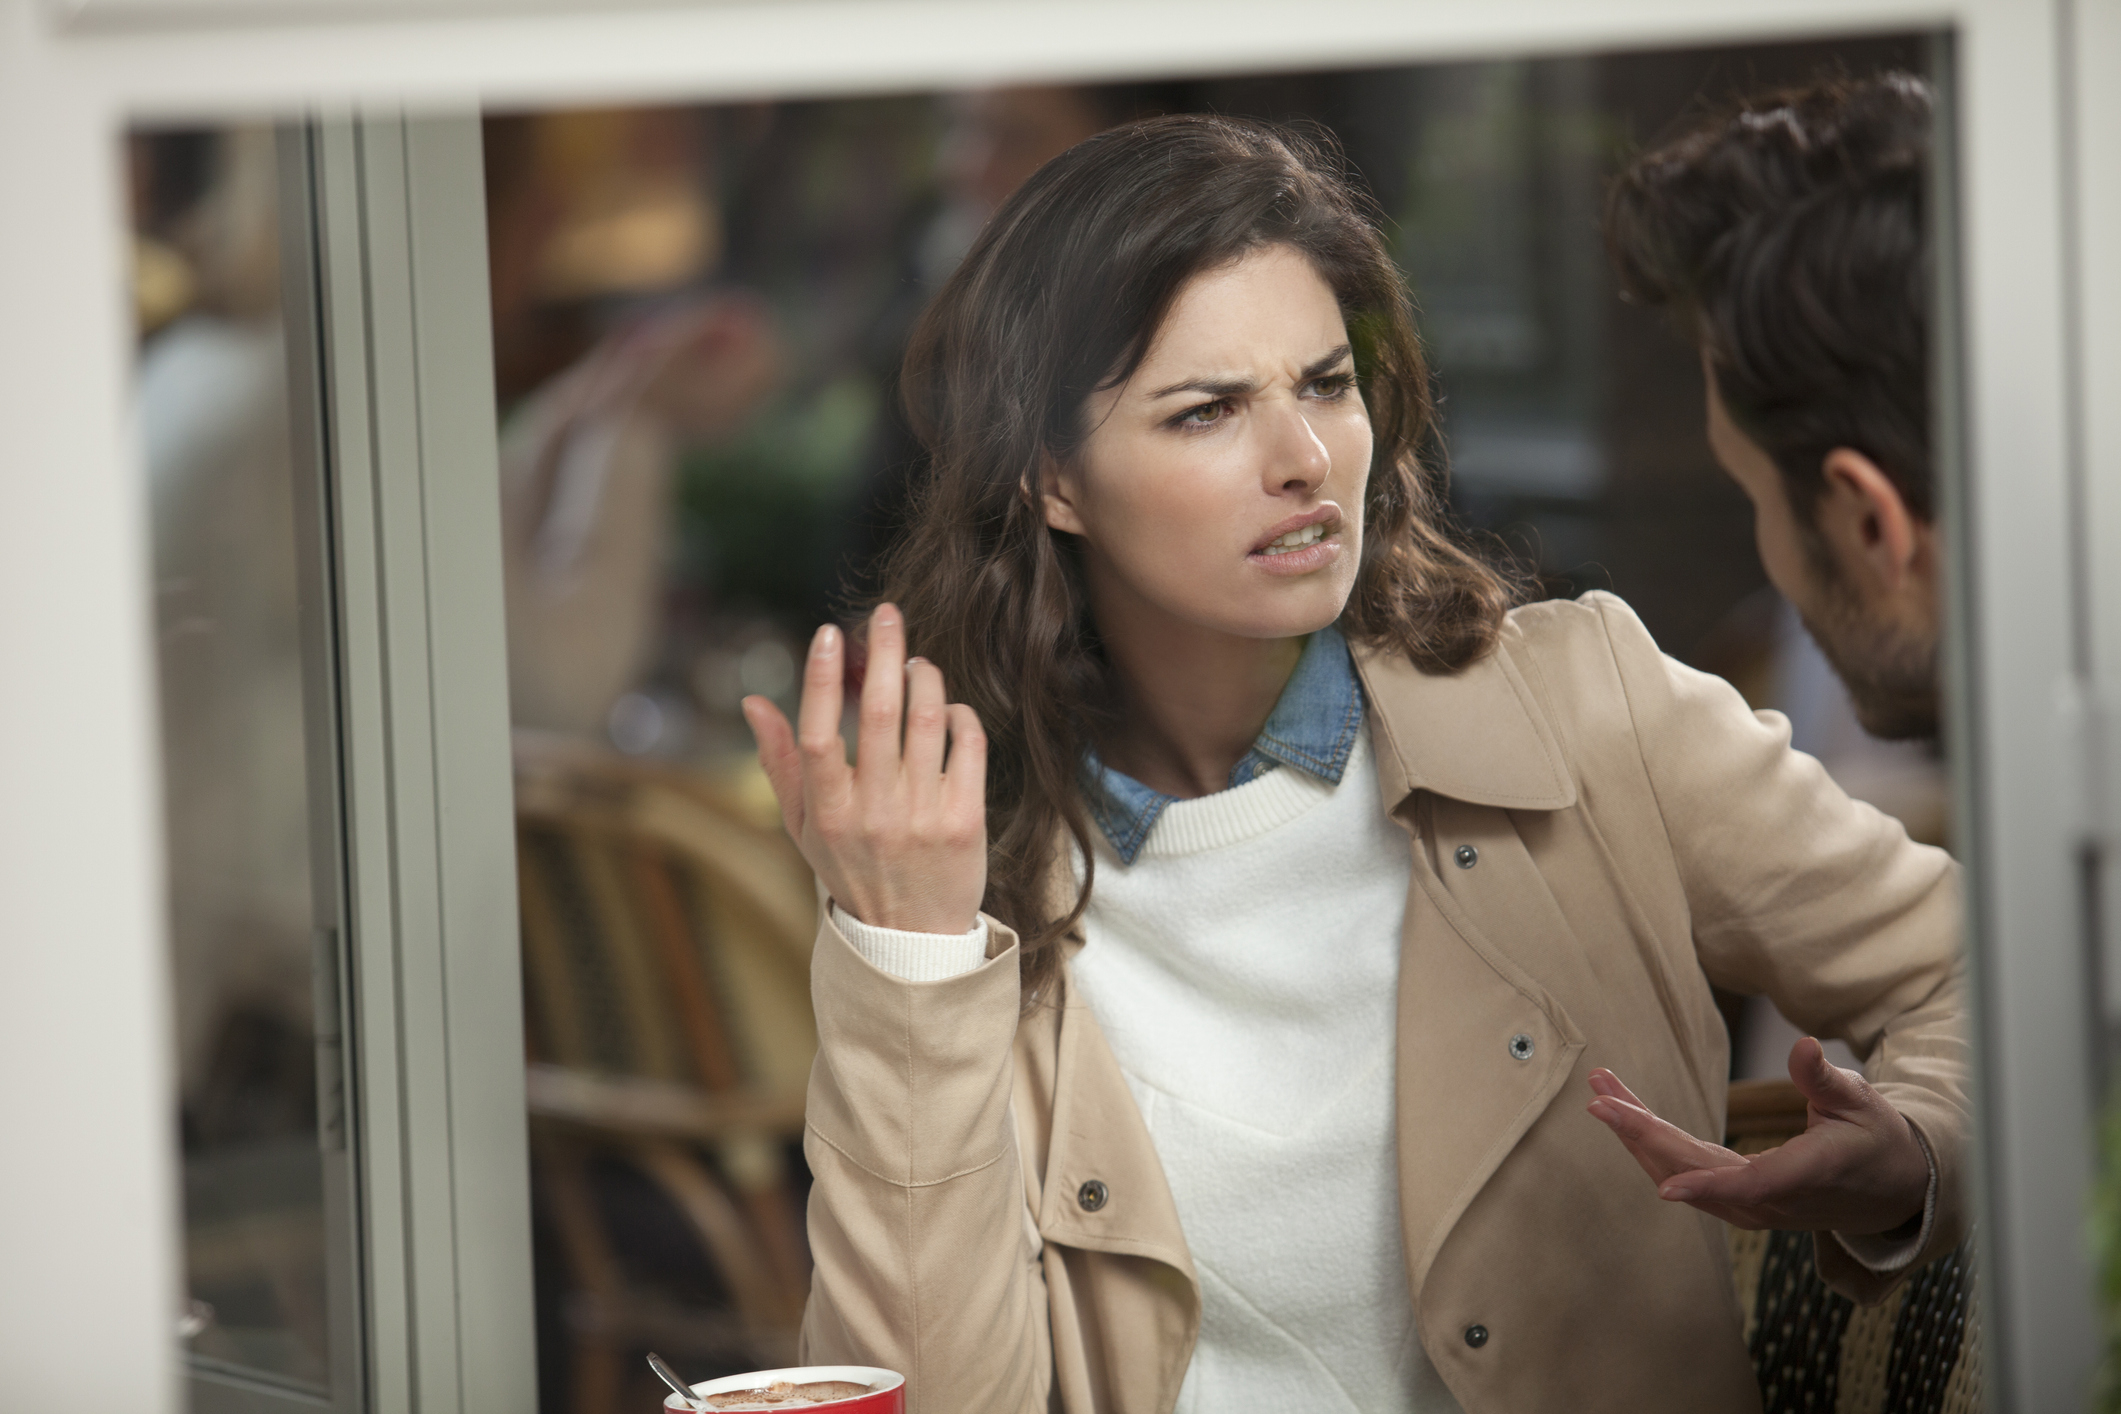 woman angrily looking at her partner in the cafe